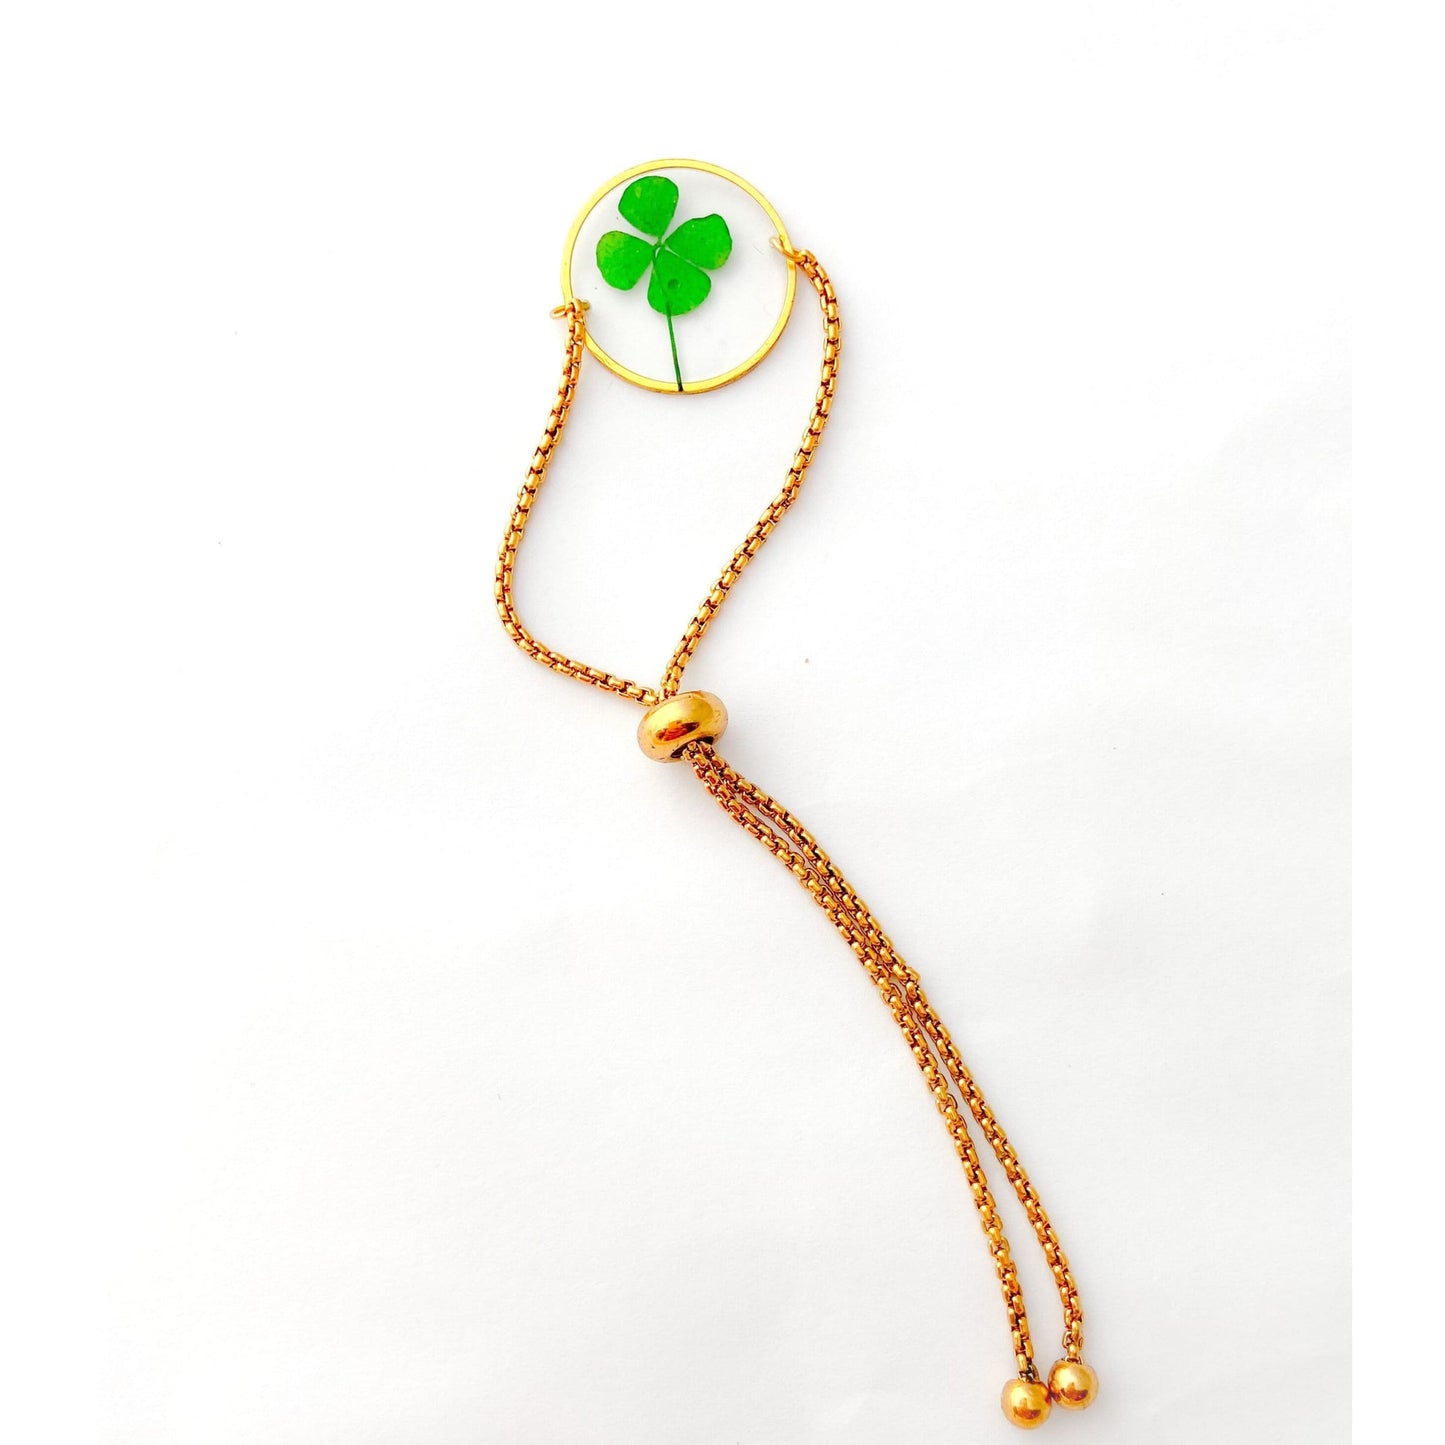 Gold color bracelet with pressed four leaf clover perfect St Patrick's gift - Lorred